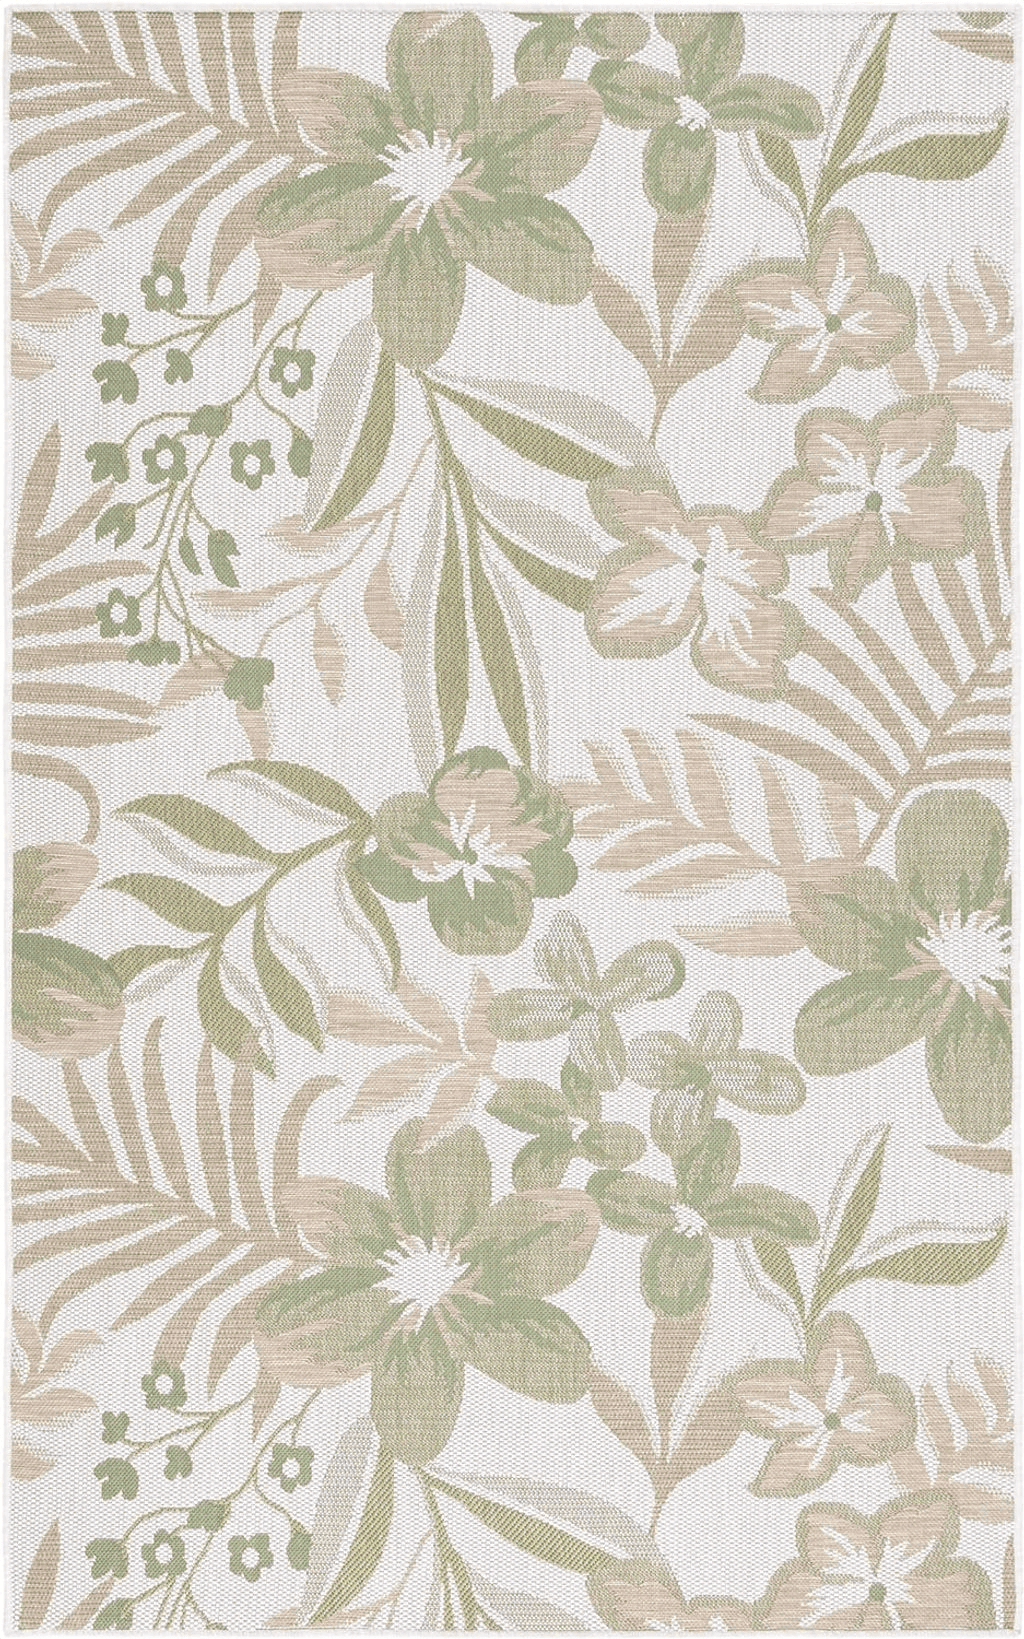 Safavieh Courtyard Collection Area Rug - 6'7" x 9'6", Ivory & Green, Non-Shedding & Easy Care, Indoor/Outdoor & Washable-Ideal for Patio, Backyard, Mudroom (CY9433-52745)